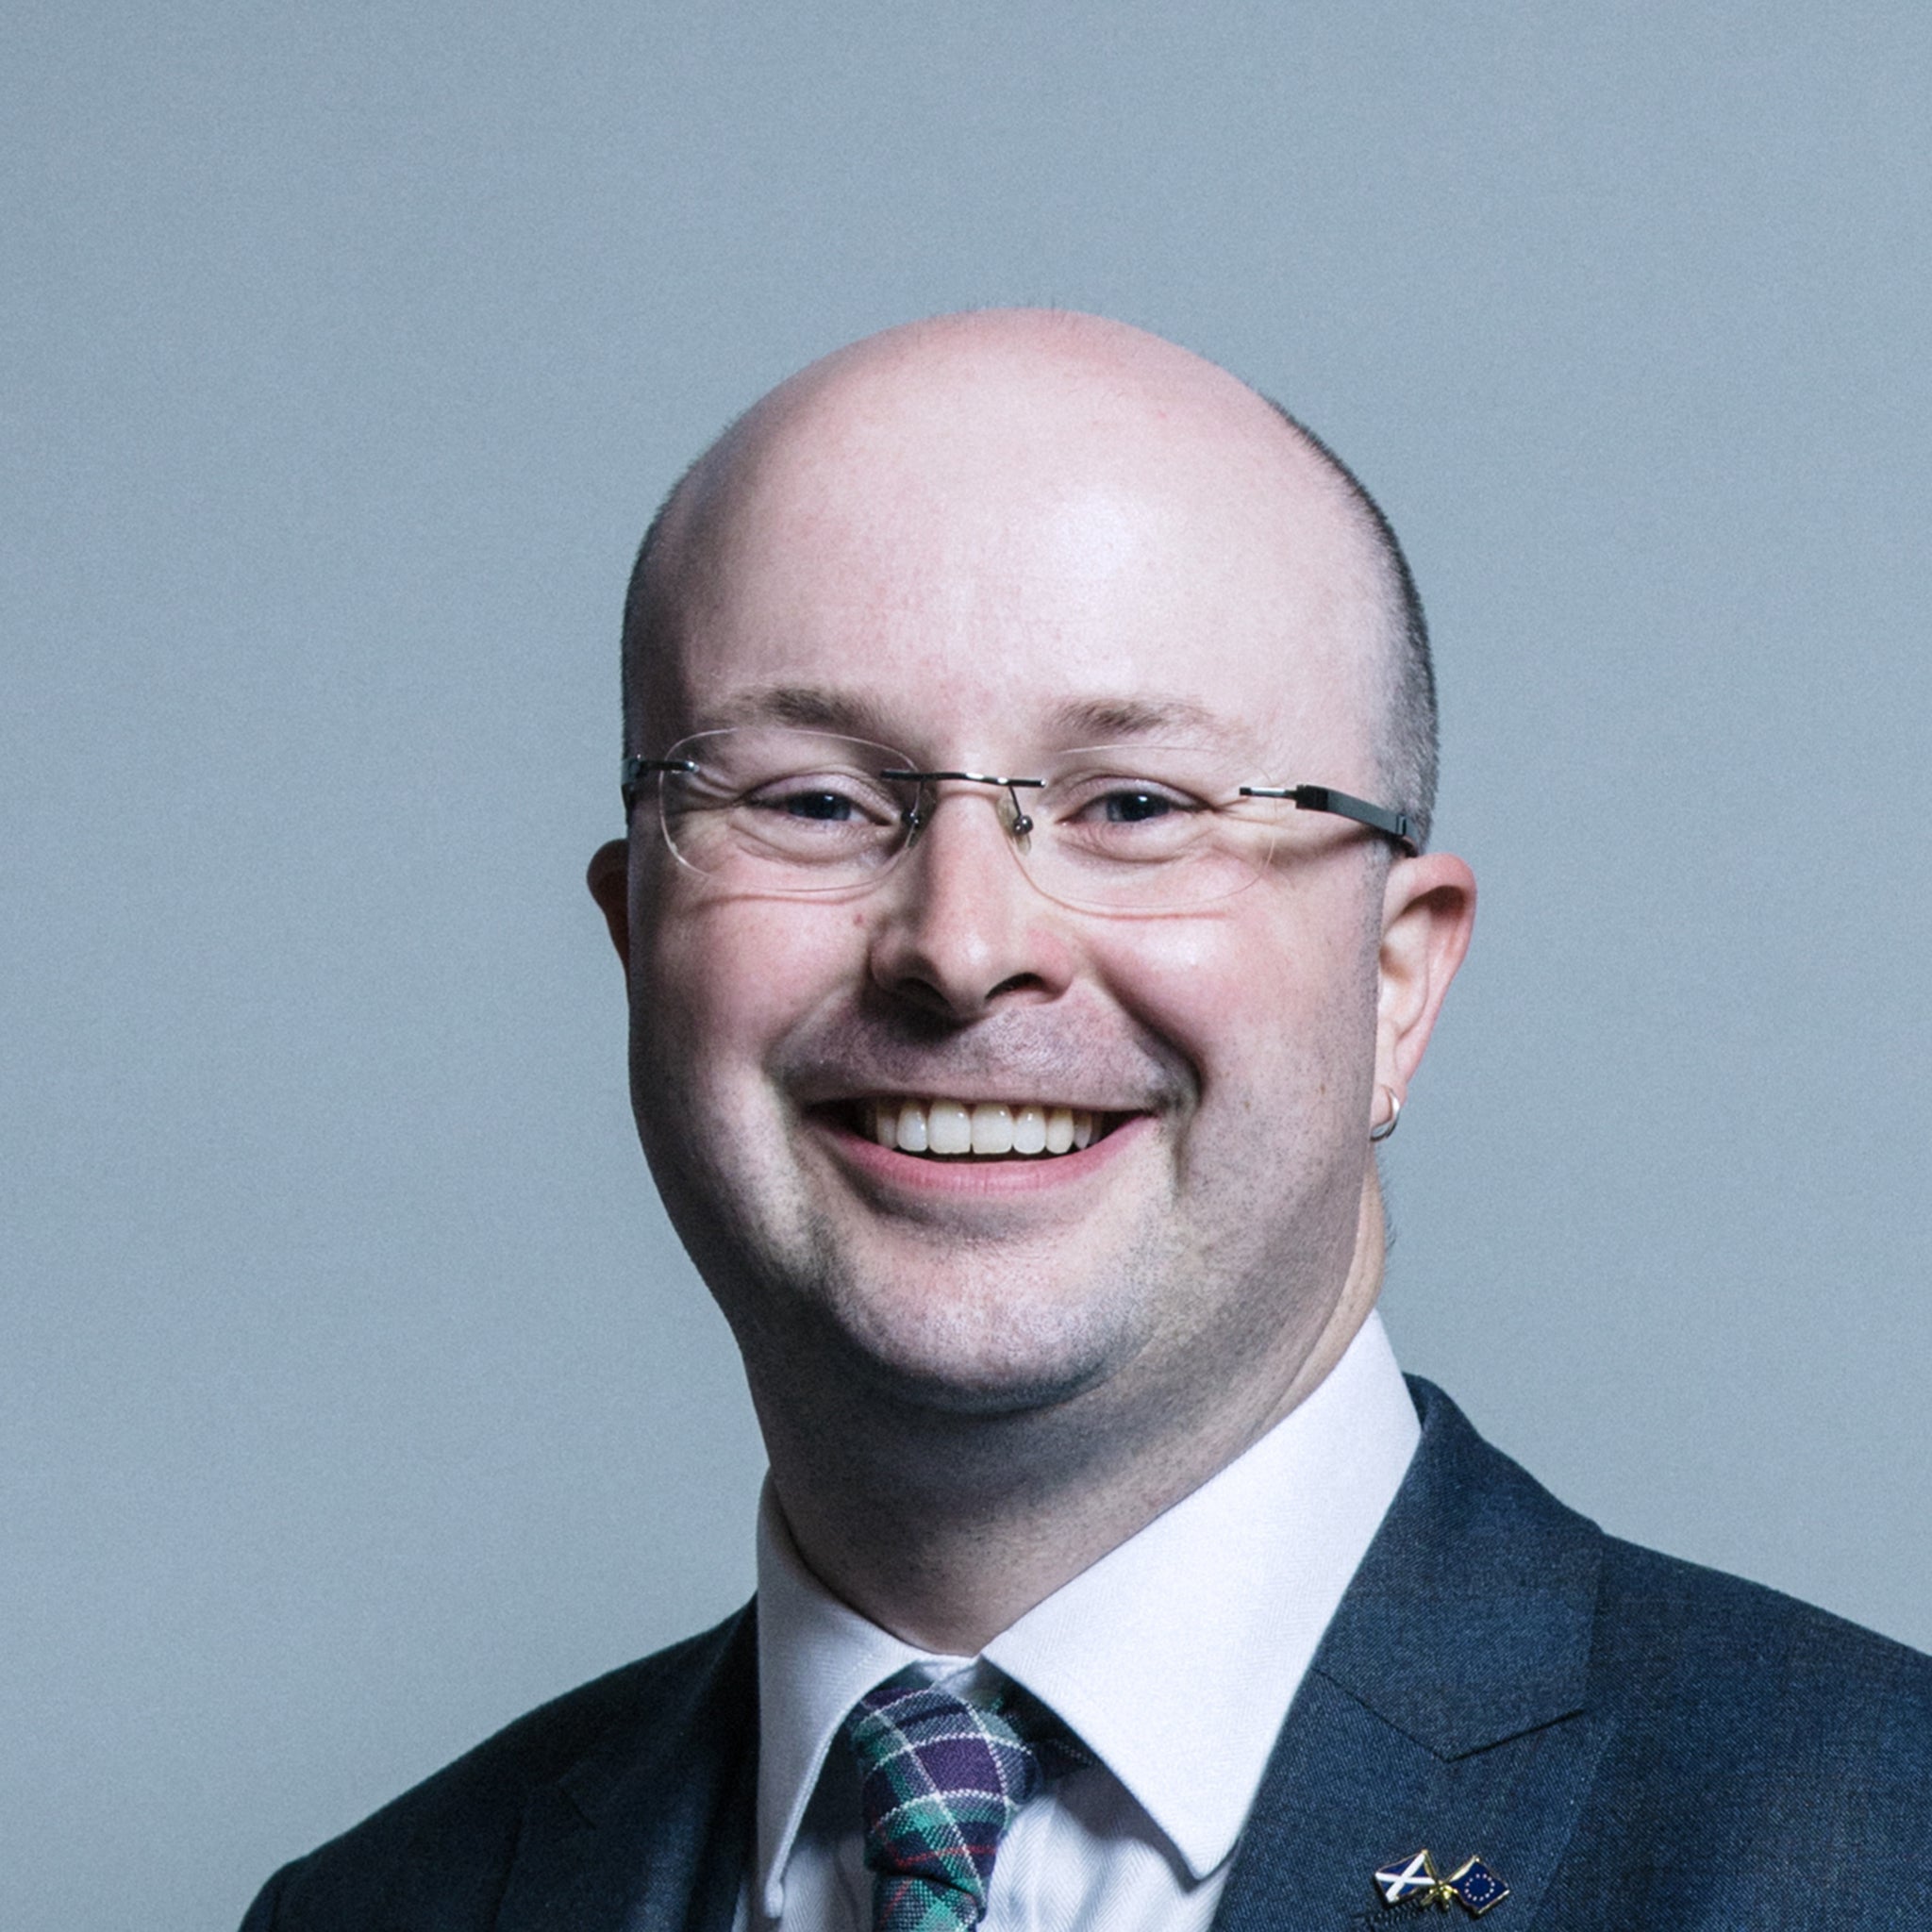 Glasgow North MP Patrick Grady found by an independent investigation tohave behaved inappropriately towards a member of staff. (Chris McAndrew/UK Parliament/PA)